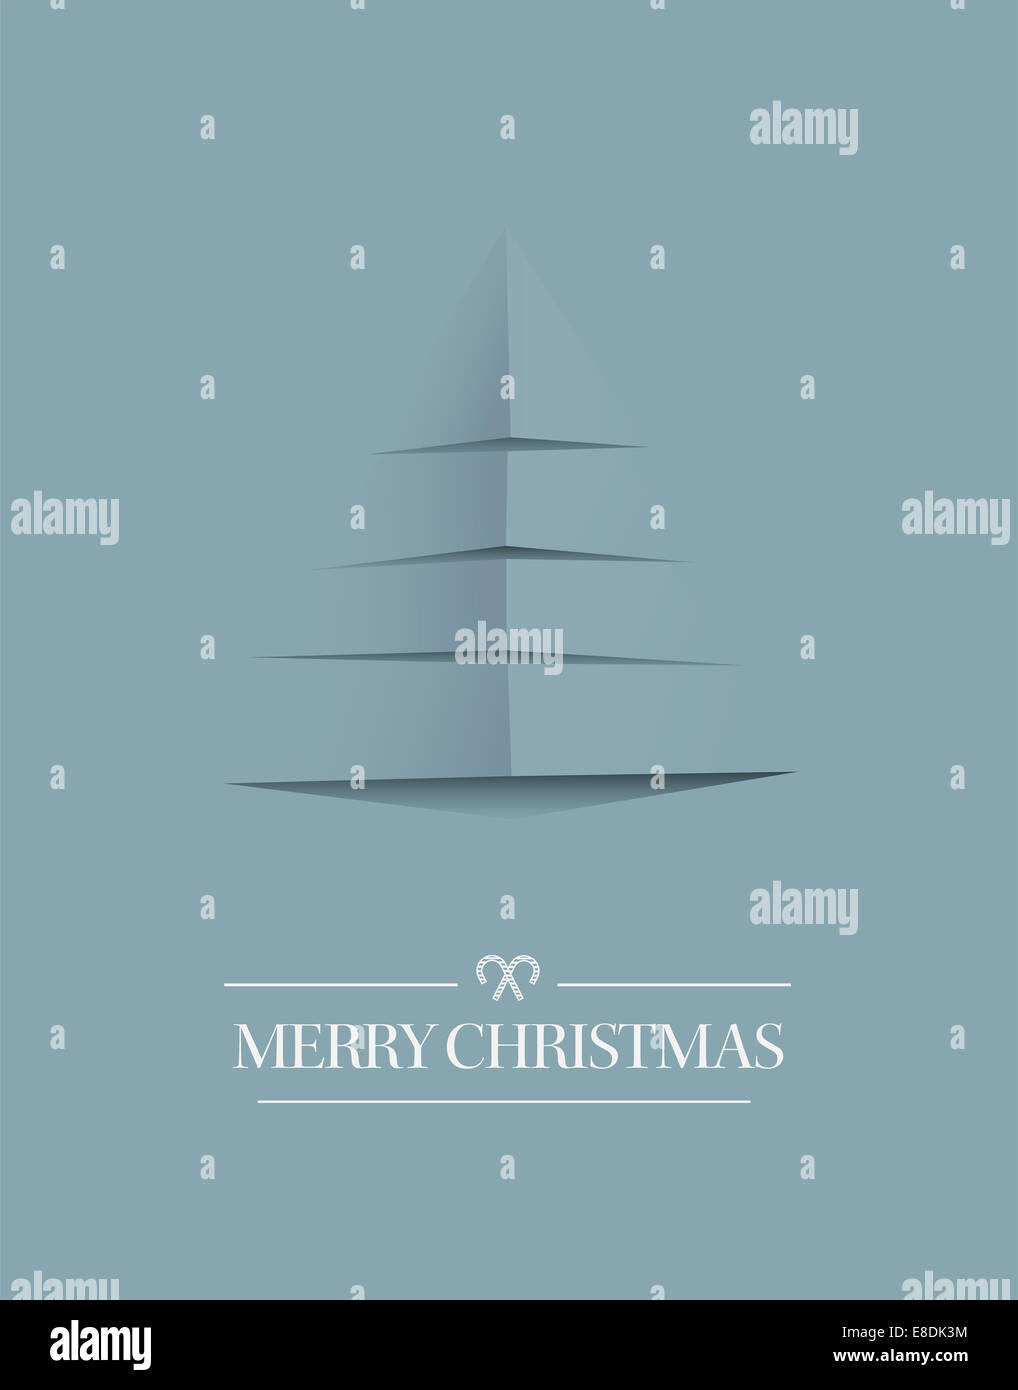 Minimal merry christmas vector in blue Stock Photo